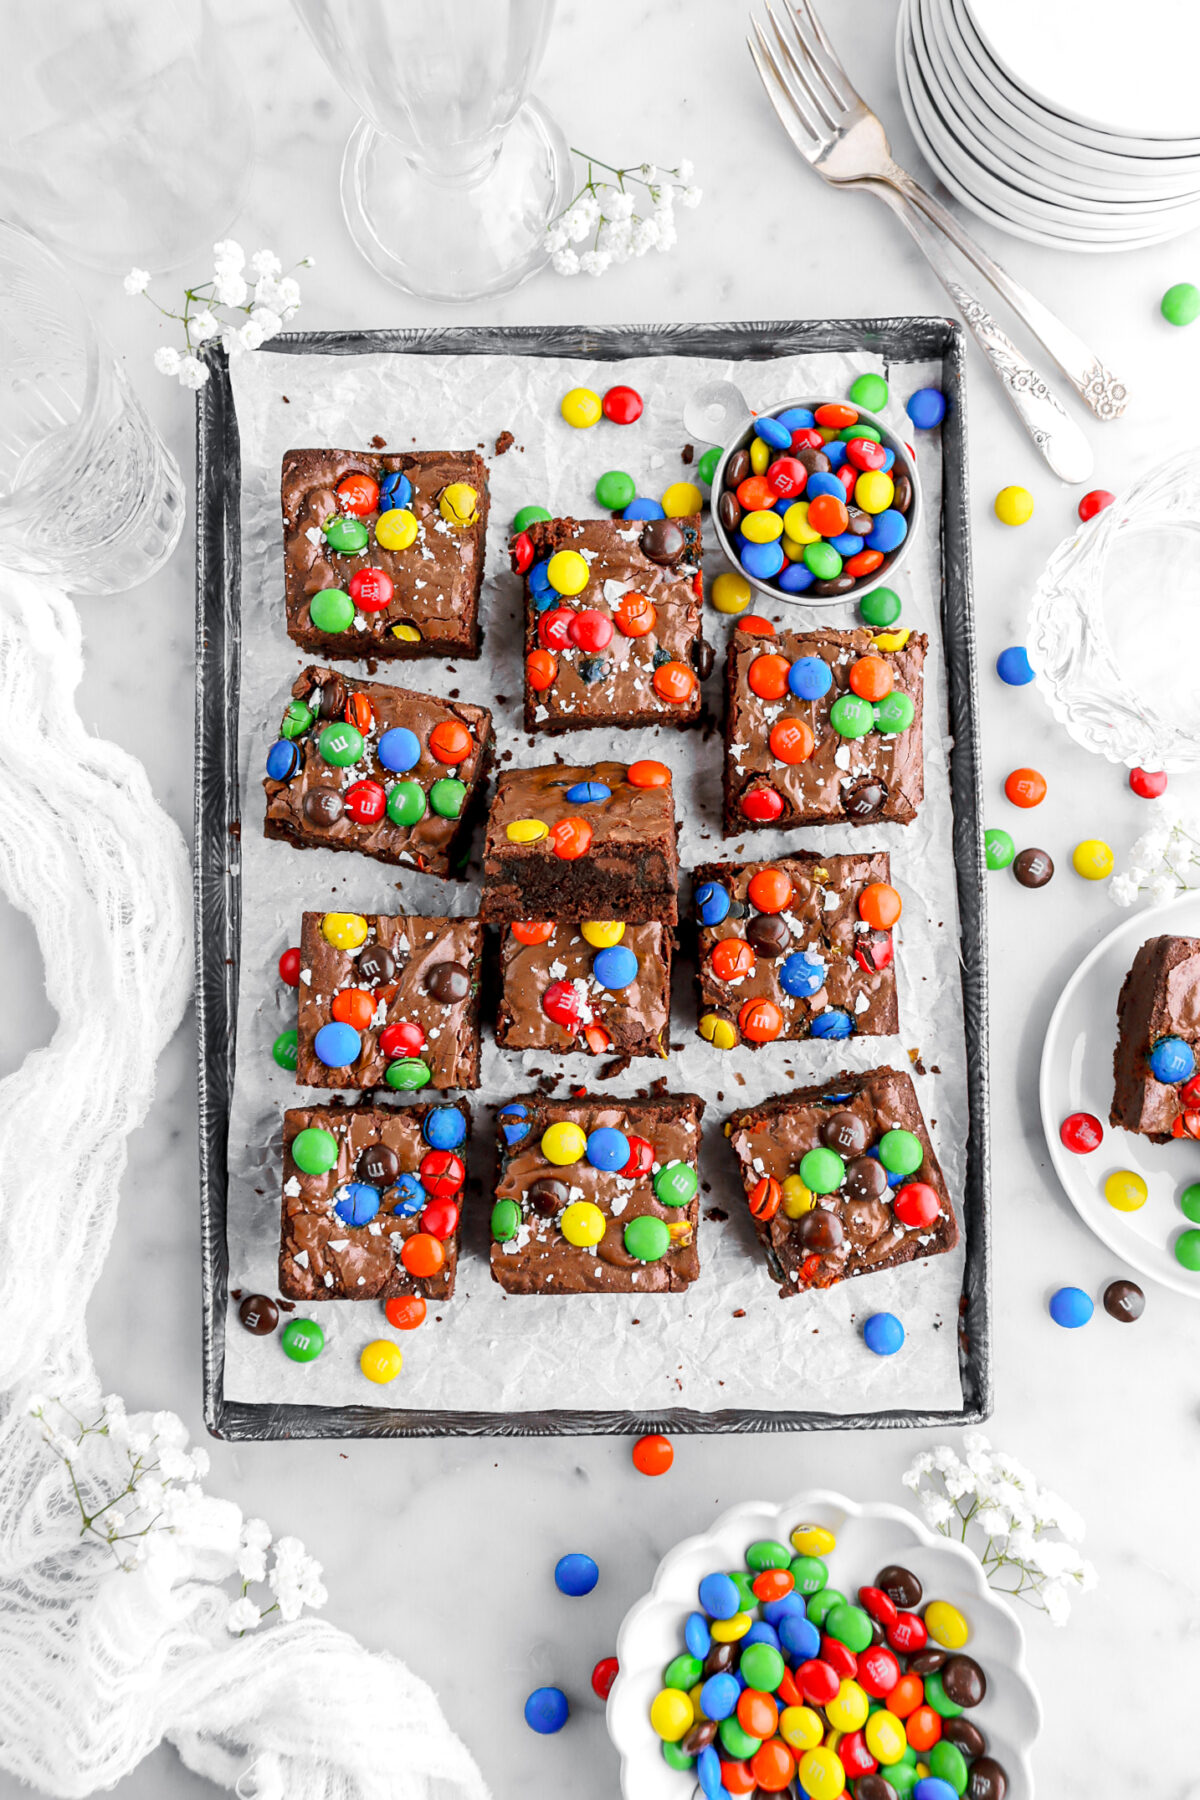 M&M brownies on lined sheet pan with two bowls of M&M's and more candies scattered around on marble surface.